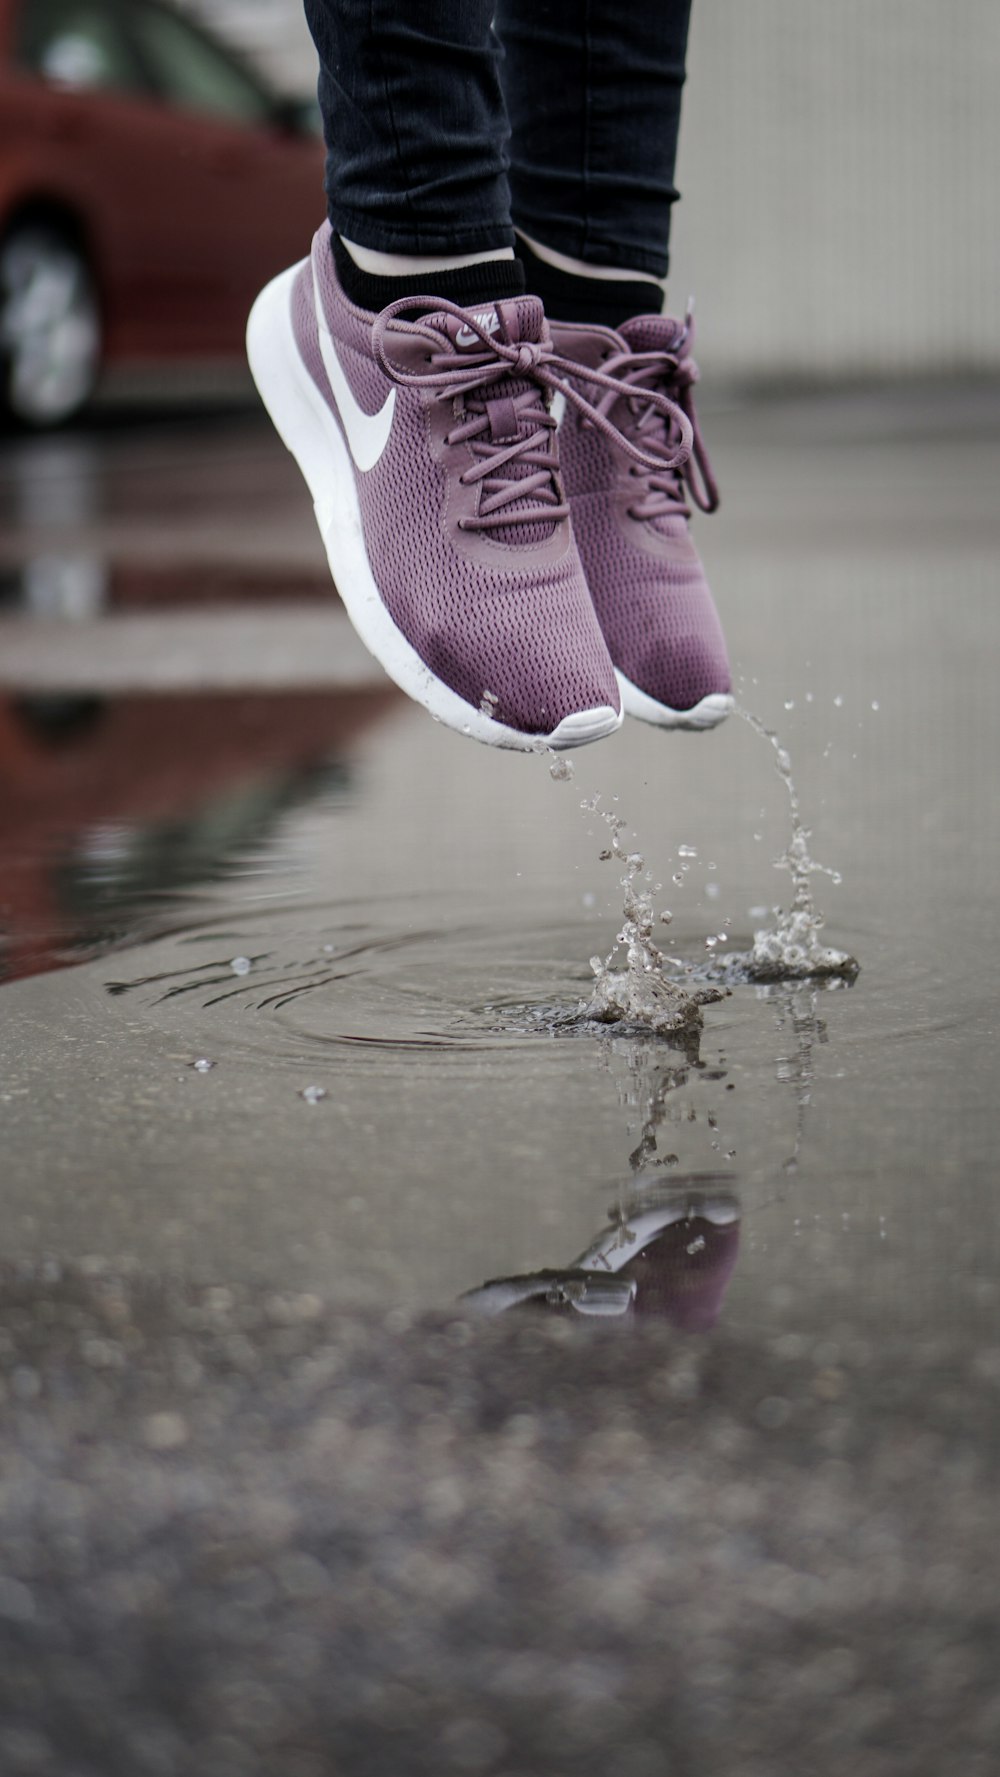 purple-and-white Nike low-top sneakers photo – Free Grey Image on Unsplash